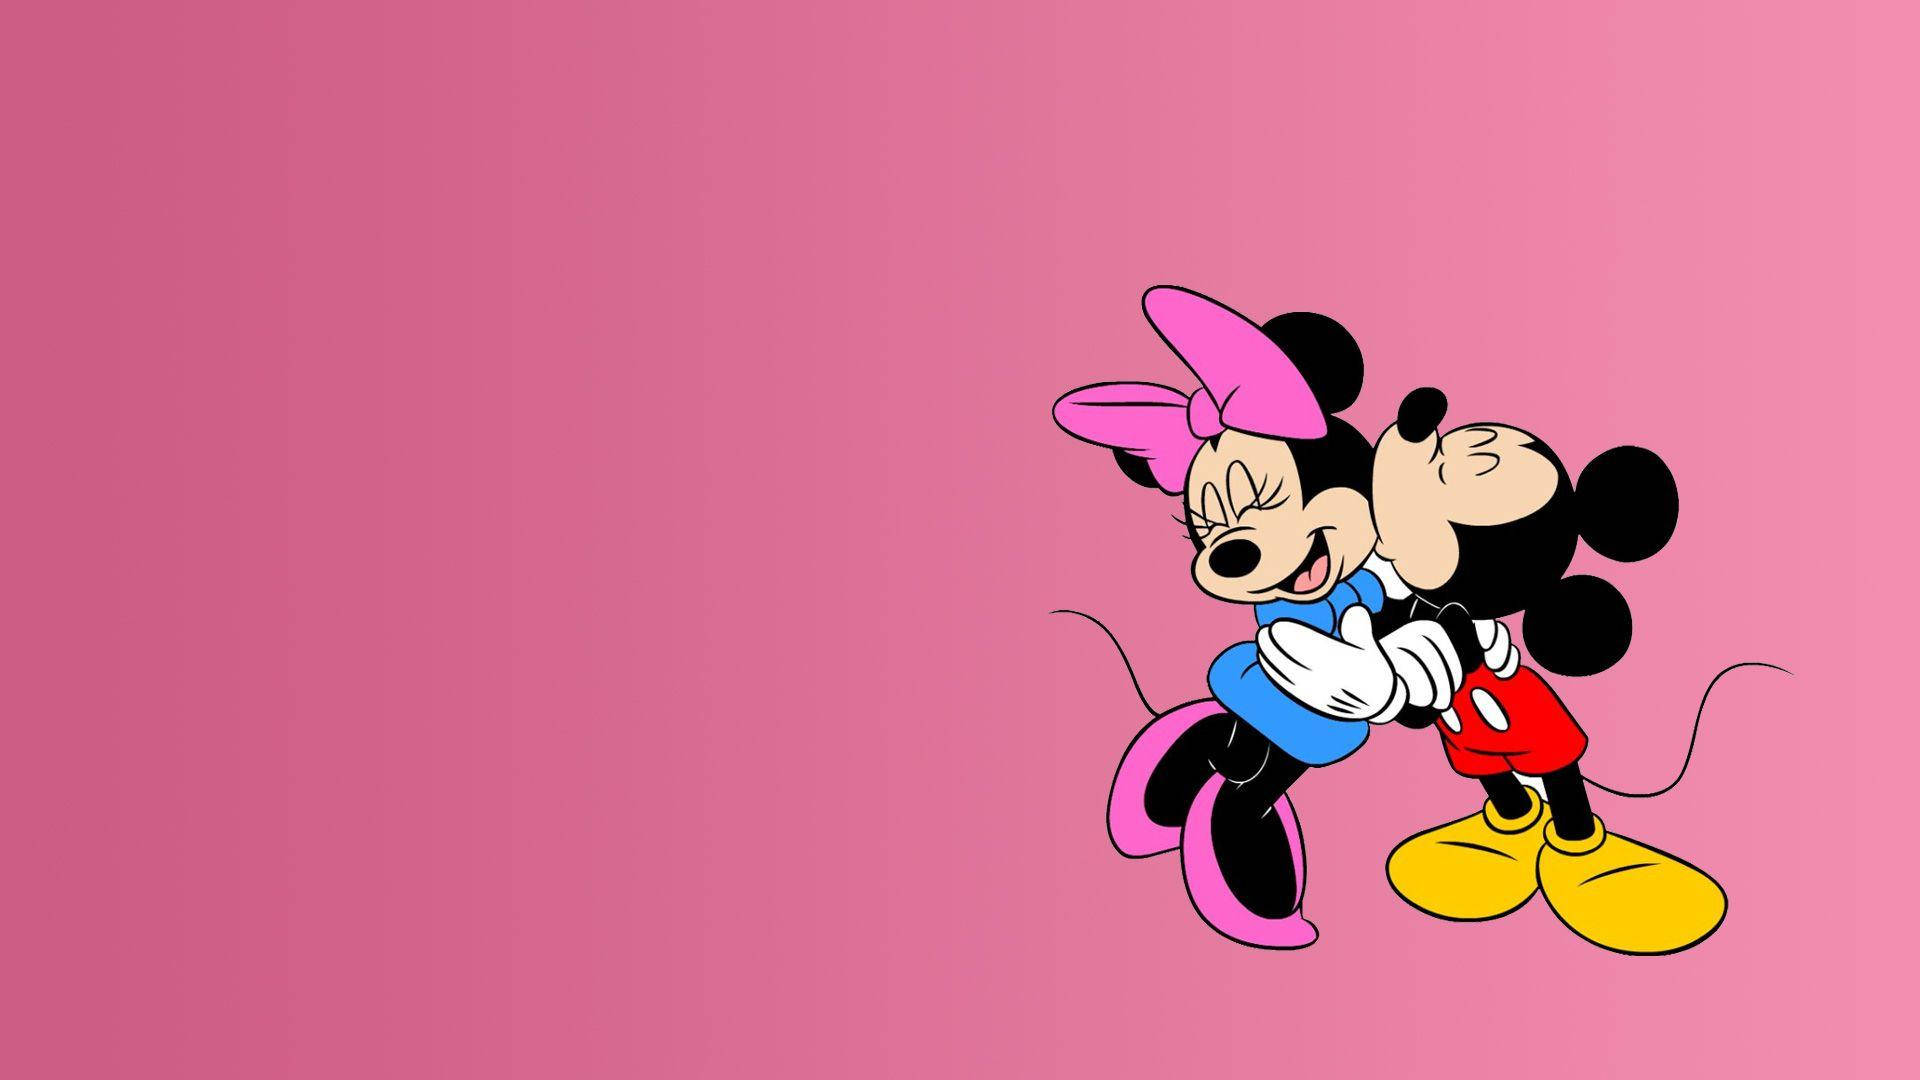 Mickey and Minnie Mouse enjoying quality time together Wallpaper